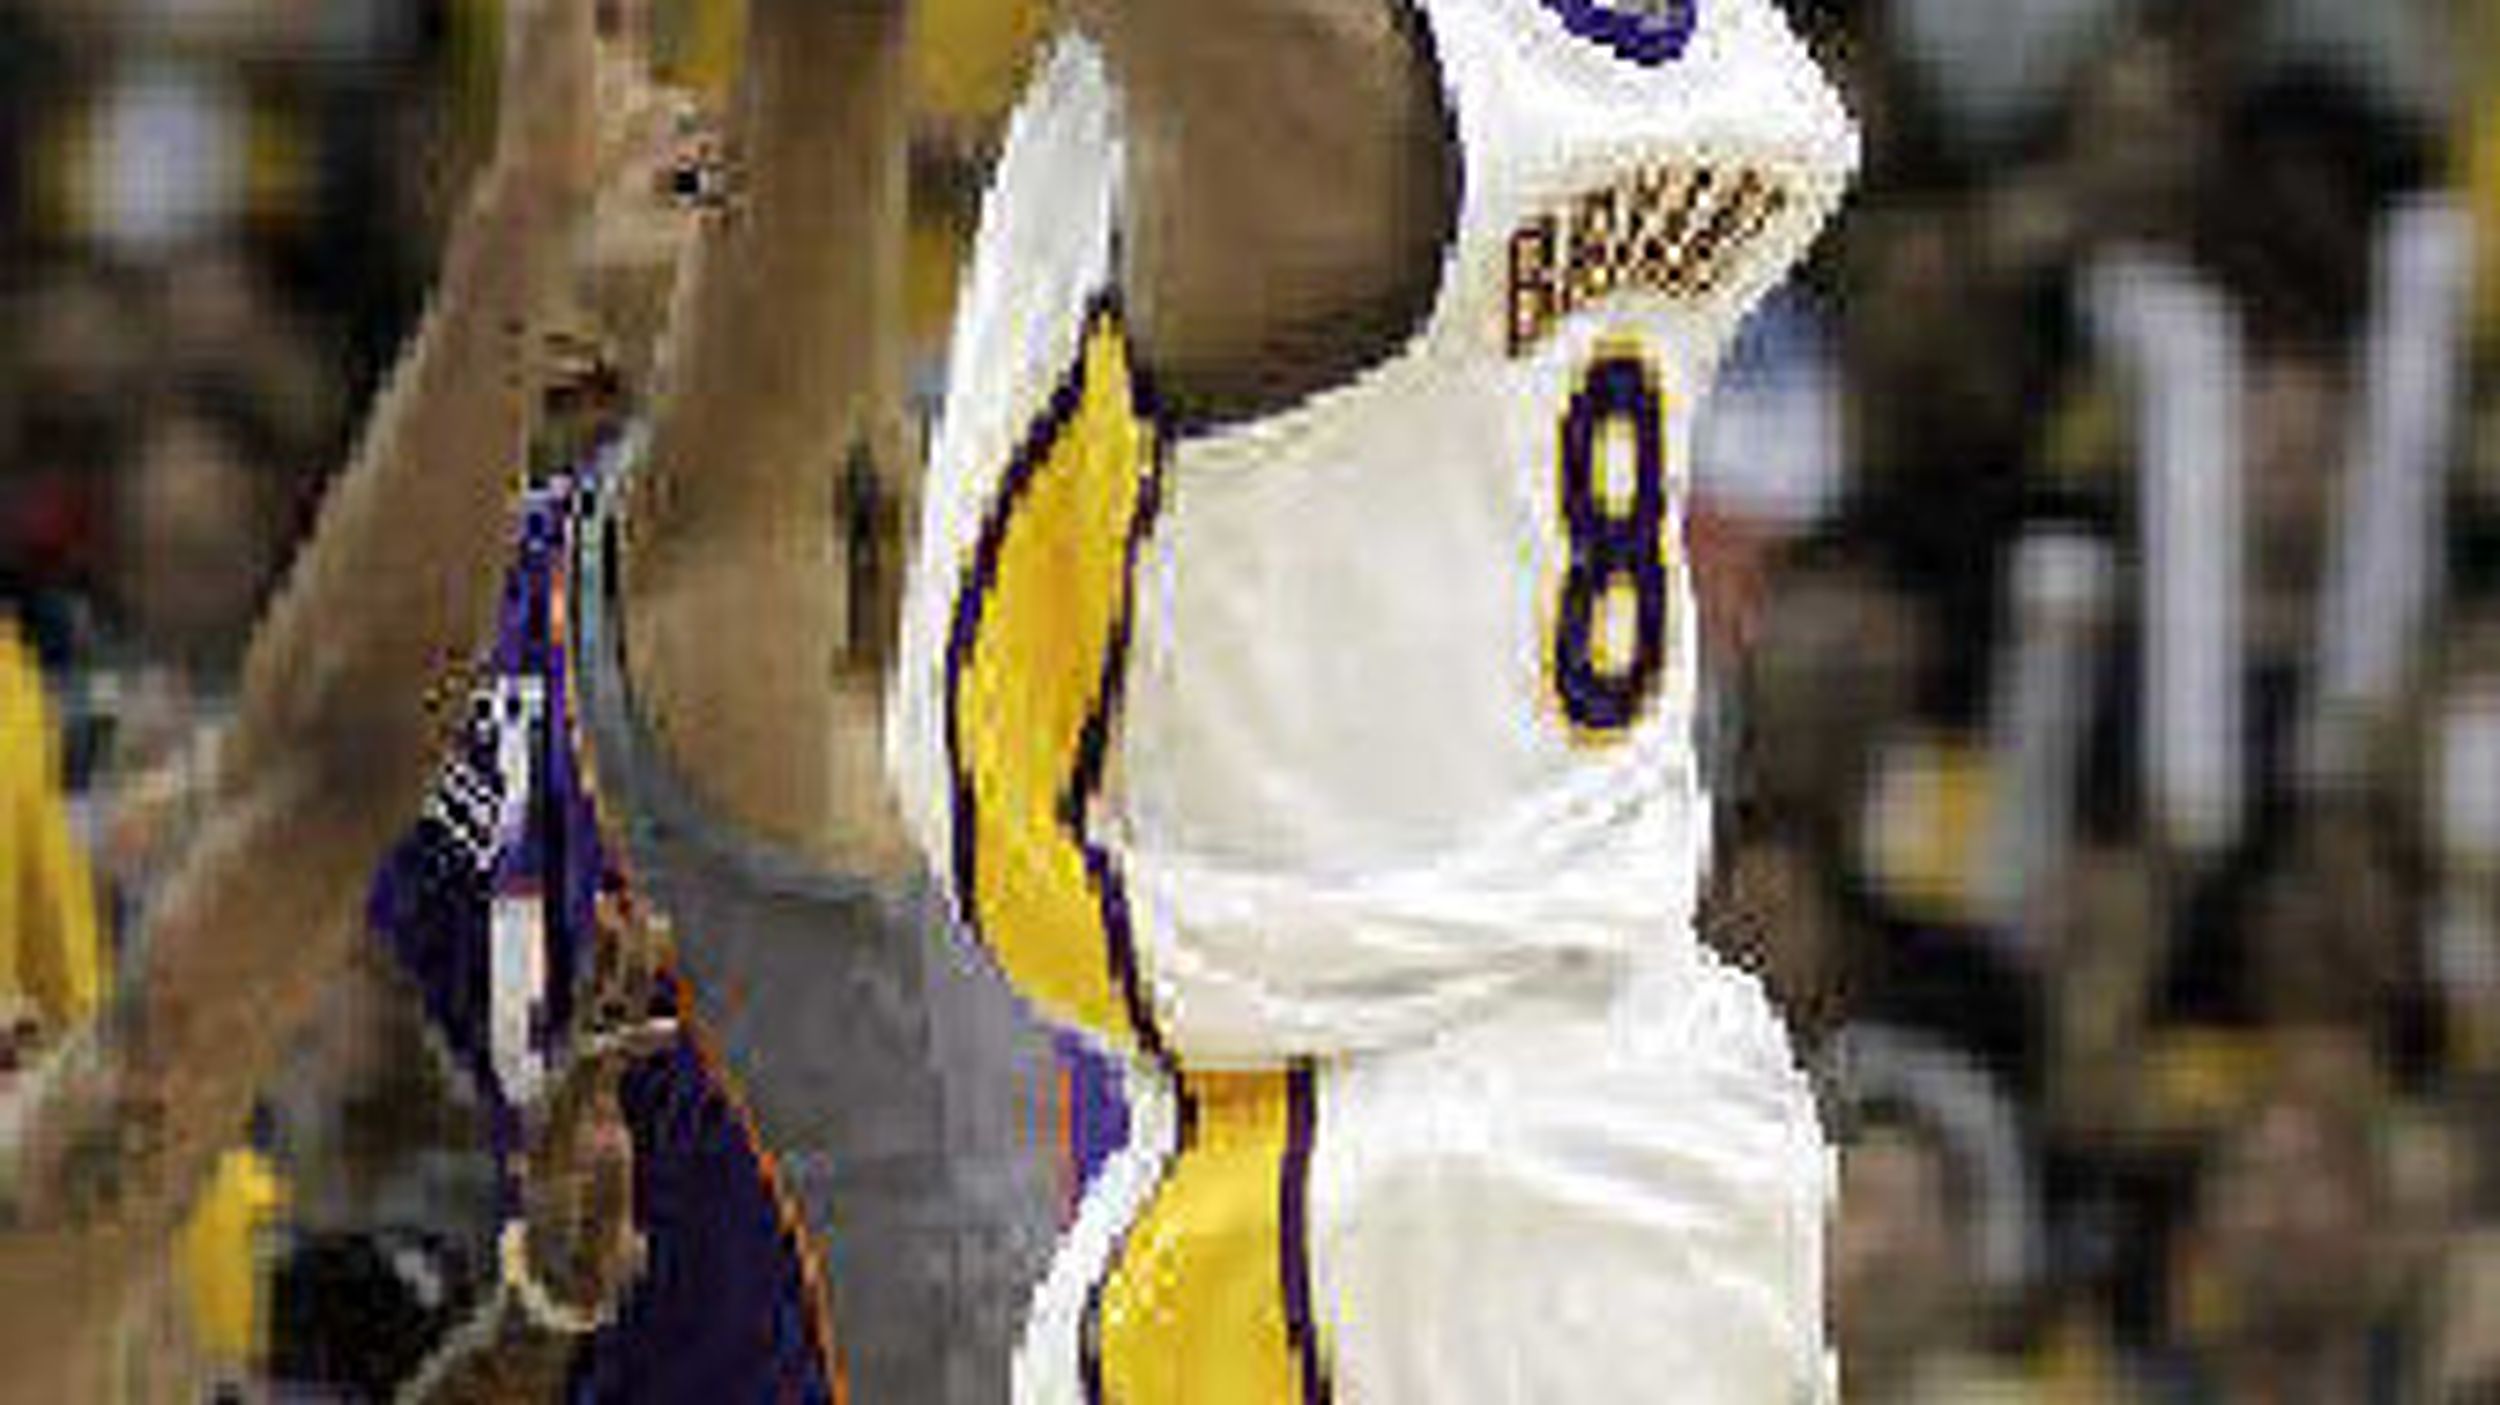 Meet Smush Parker: The Basketball Player Who Kobe Bryant Did Not Like